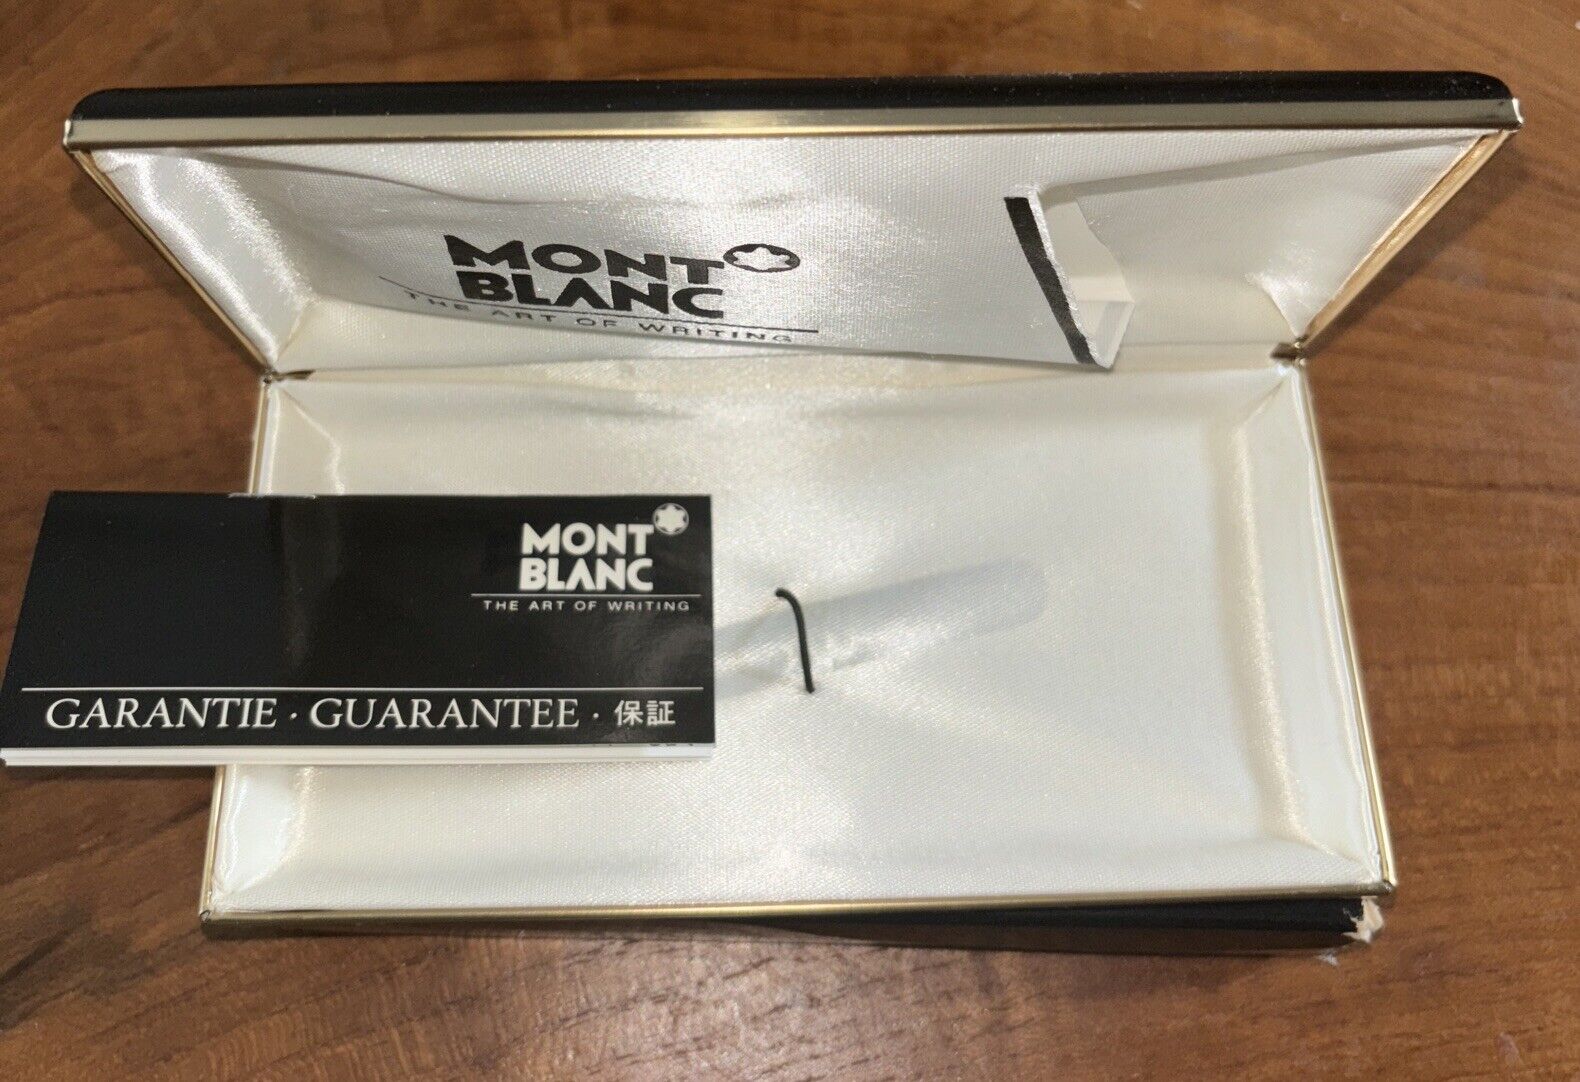 VINTAGE MONT BLANC FOUNTAIN PEN Hard Case , Instructions Manual And Box.